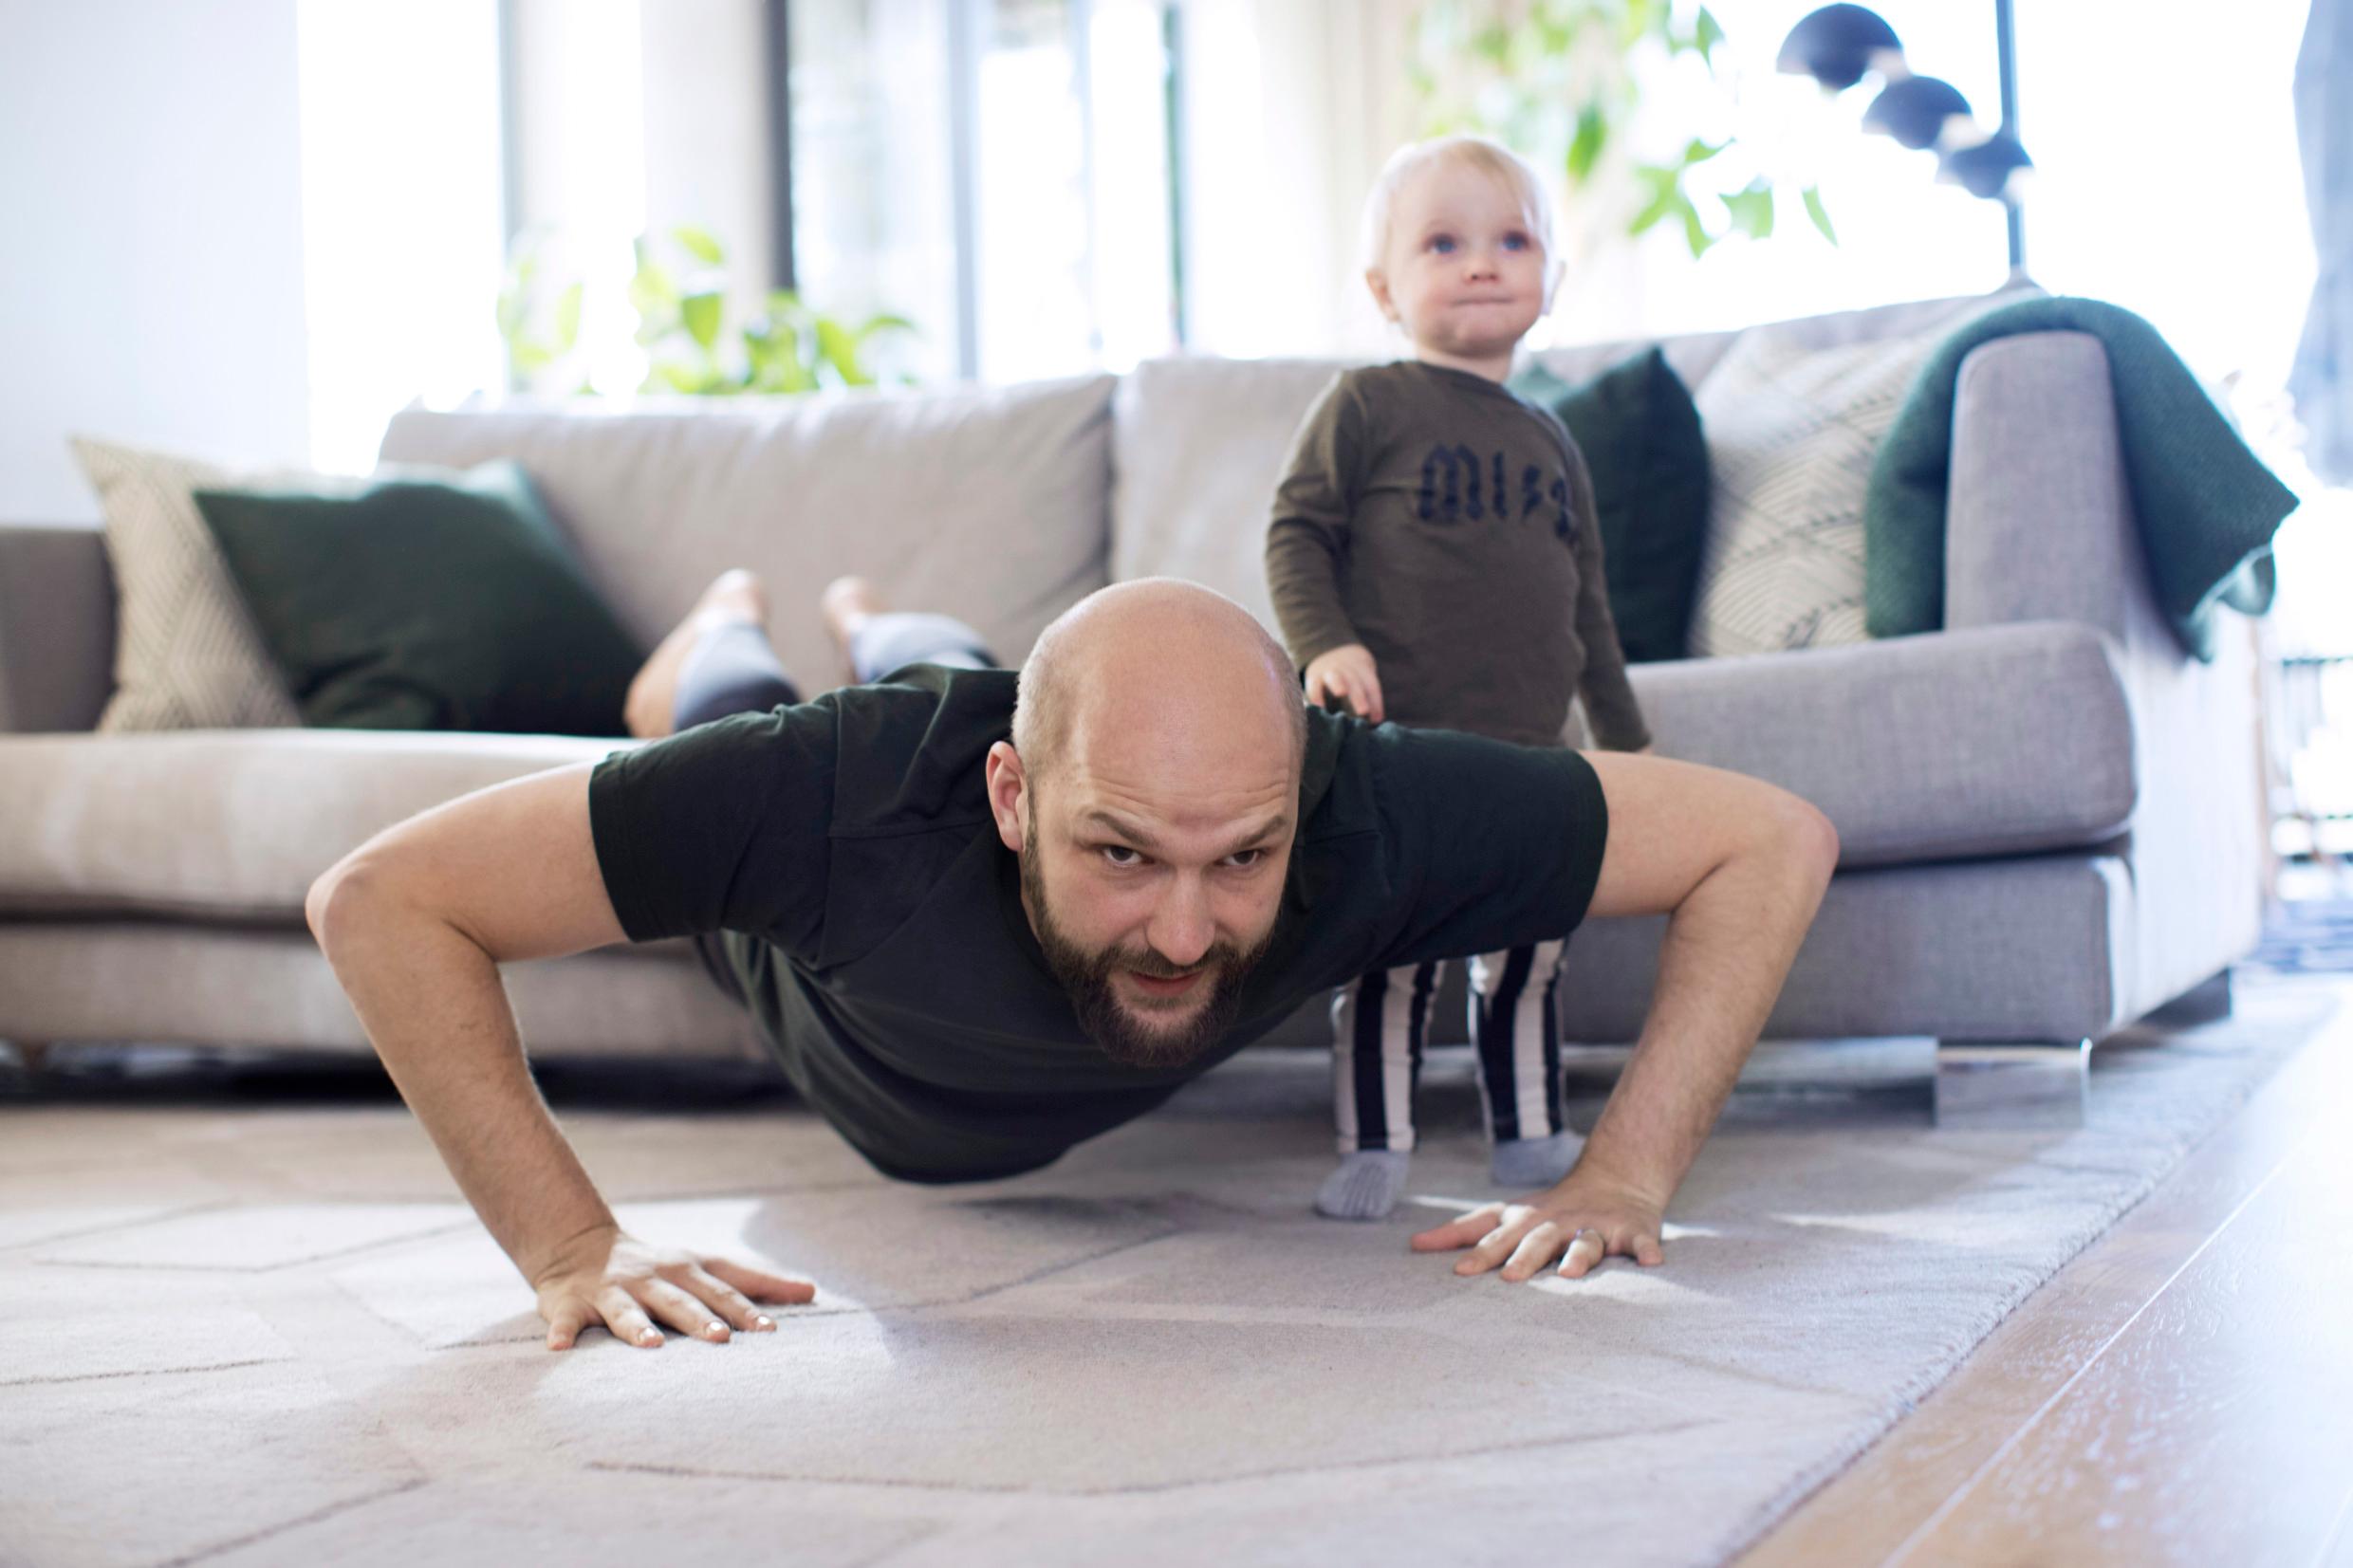 A man is doing push-ups with his feet on a sofa and his hands on the floor. A child is standing next to him.